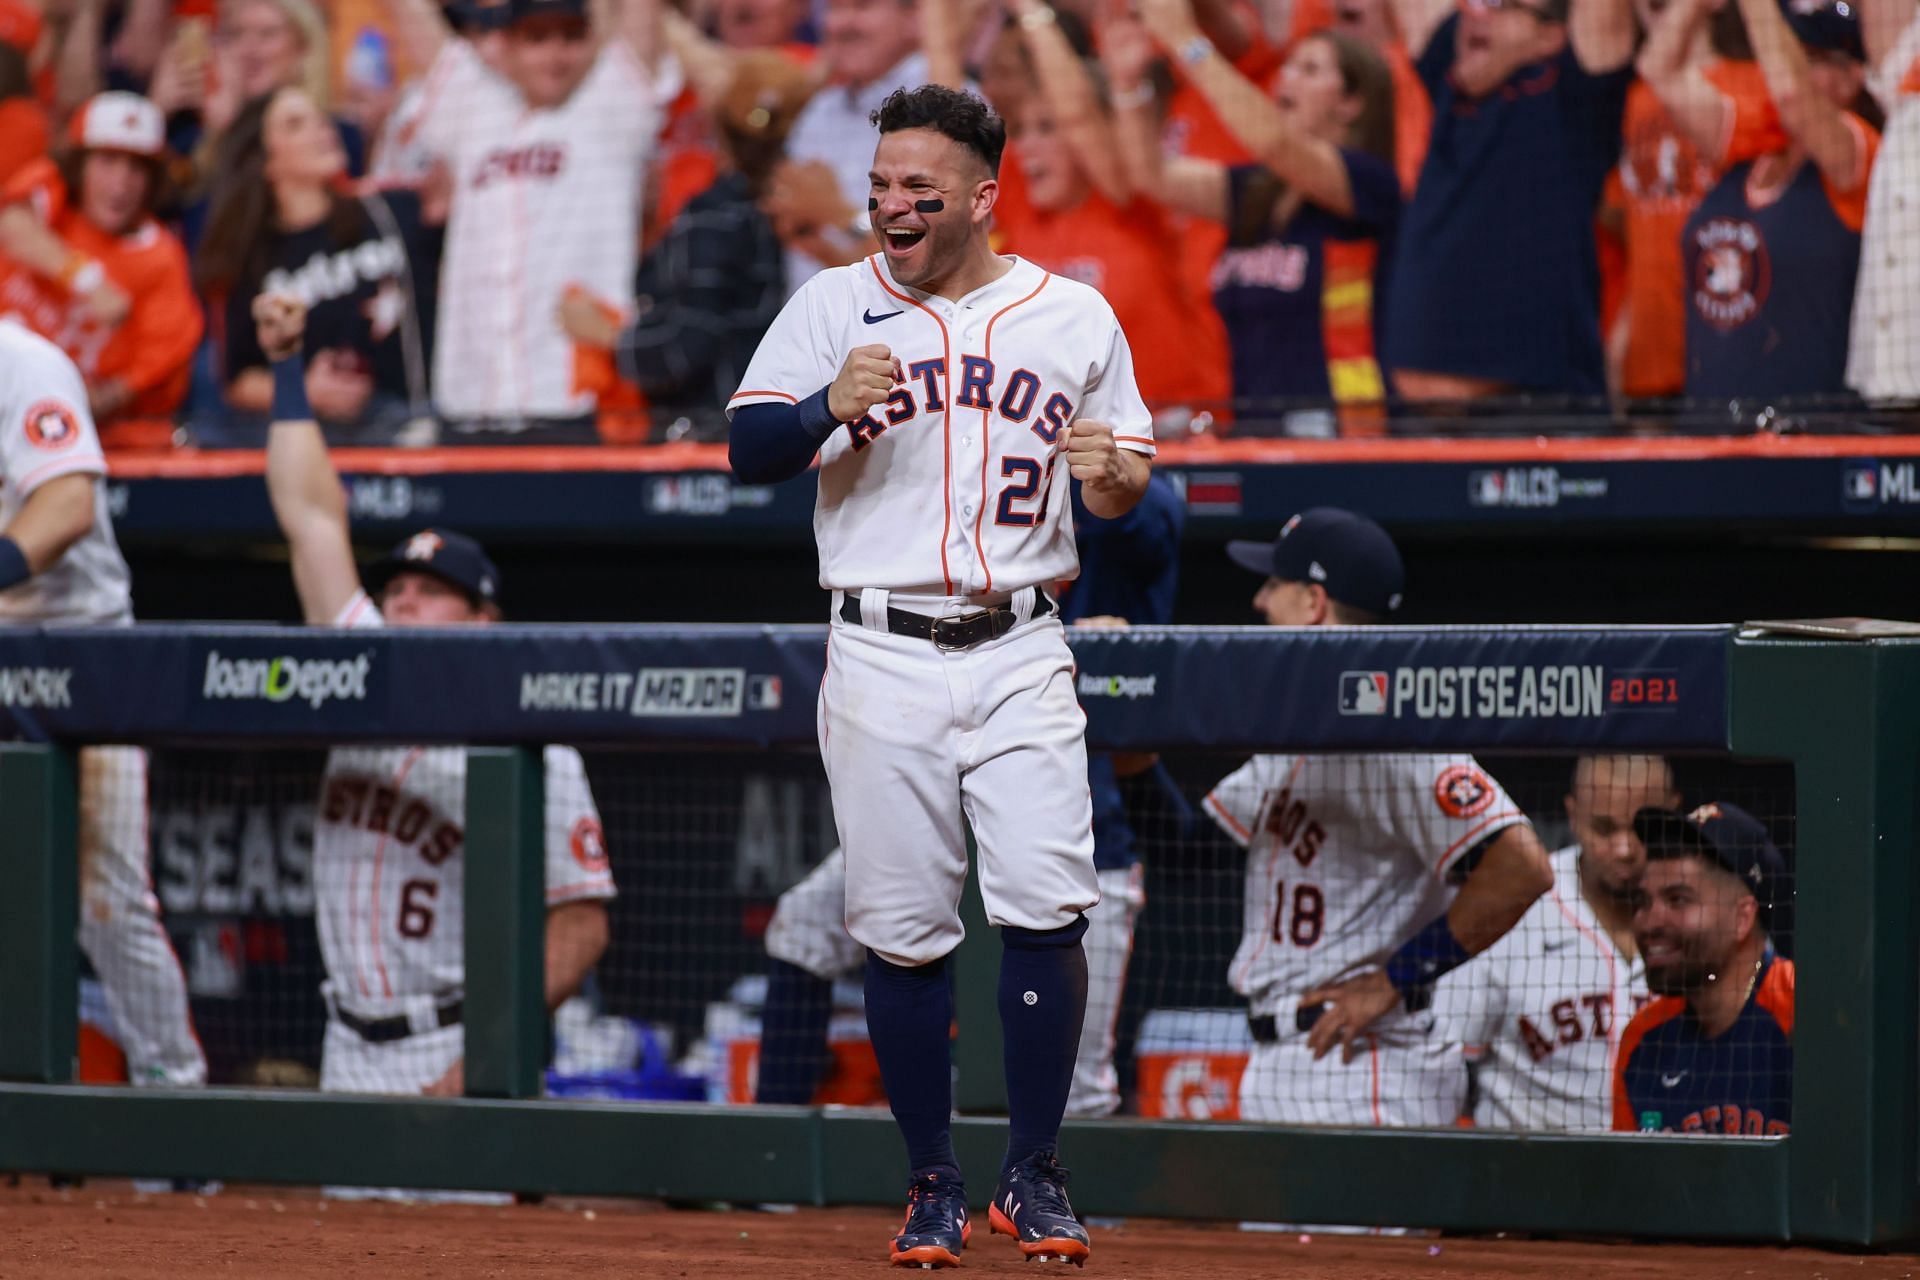 Jose Altuve of the Houston Astros celebrates during the Championship Series against the Boston Red Sox.